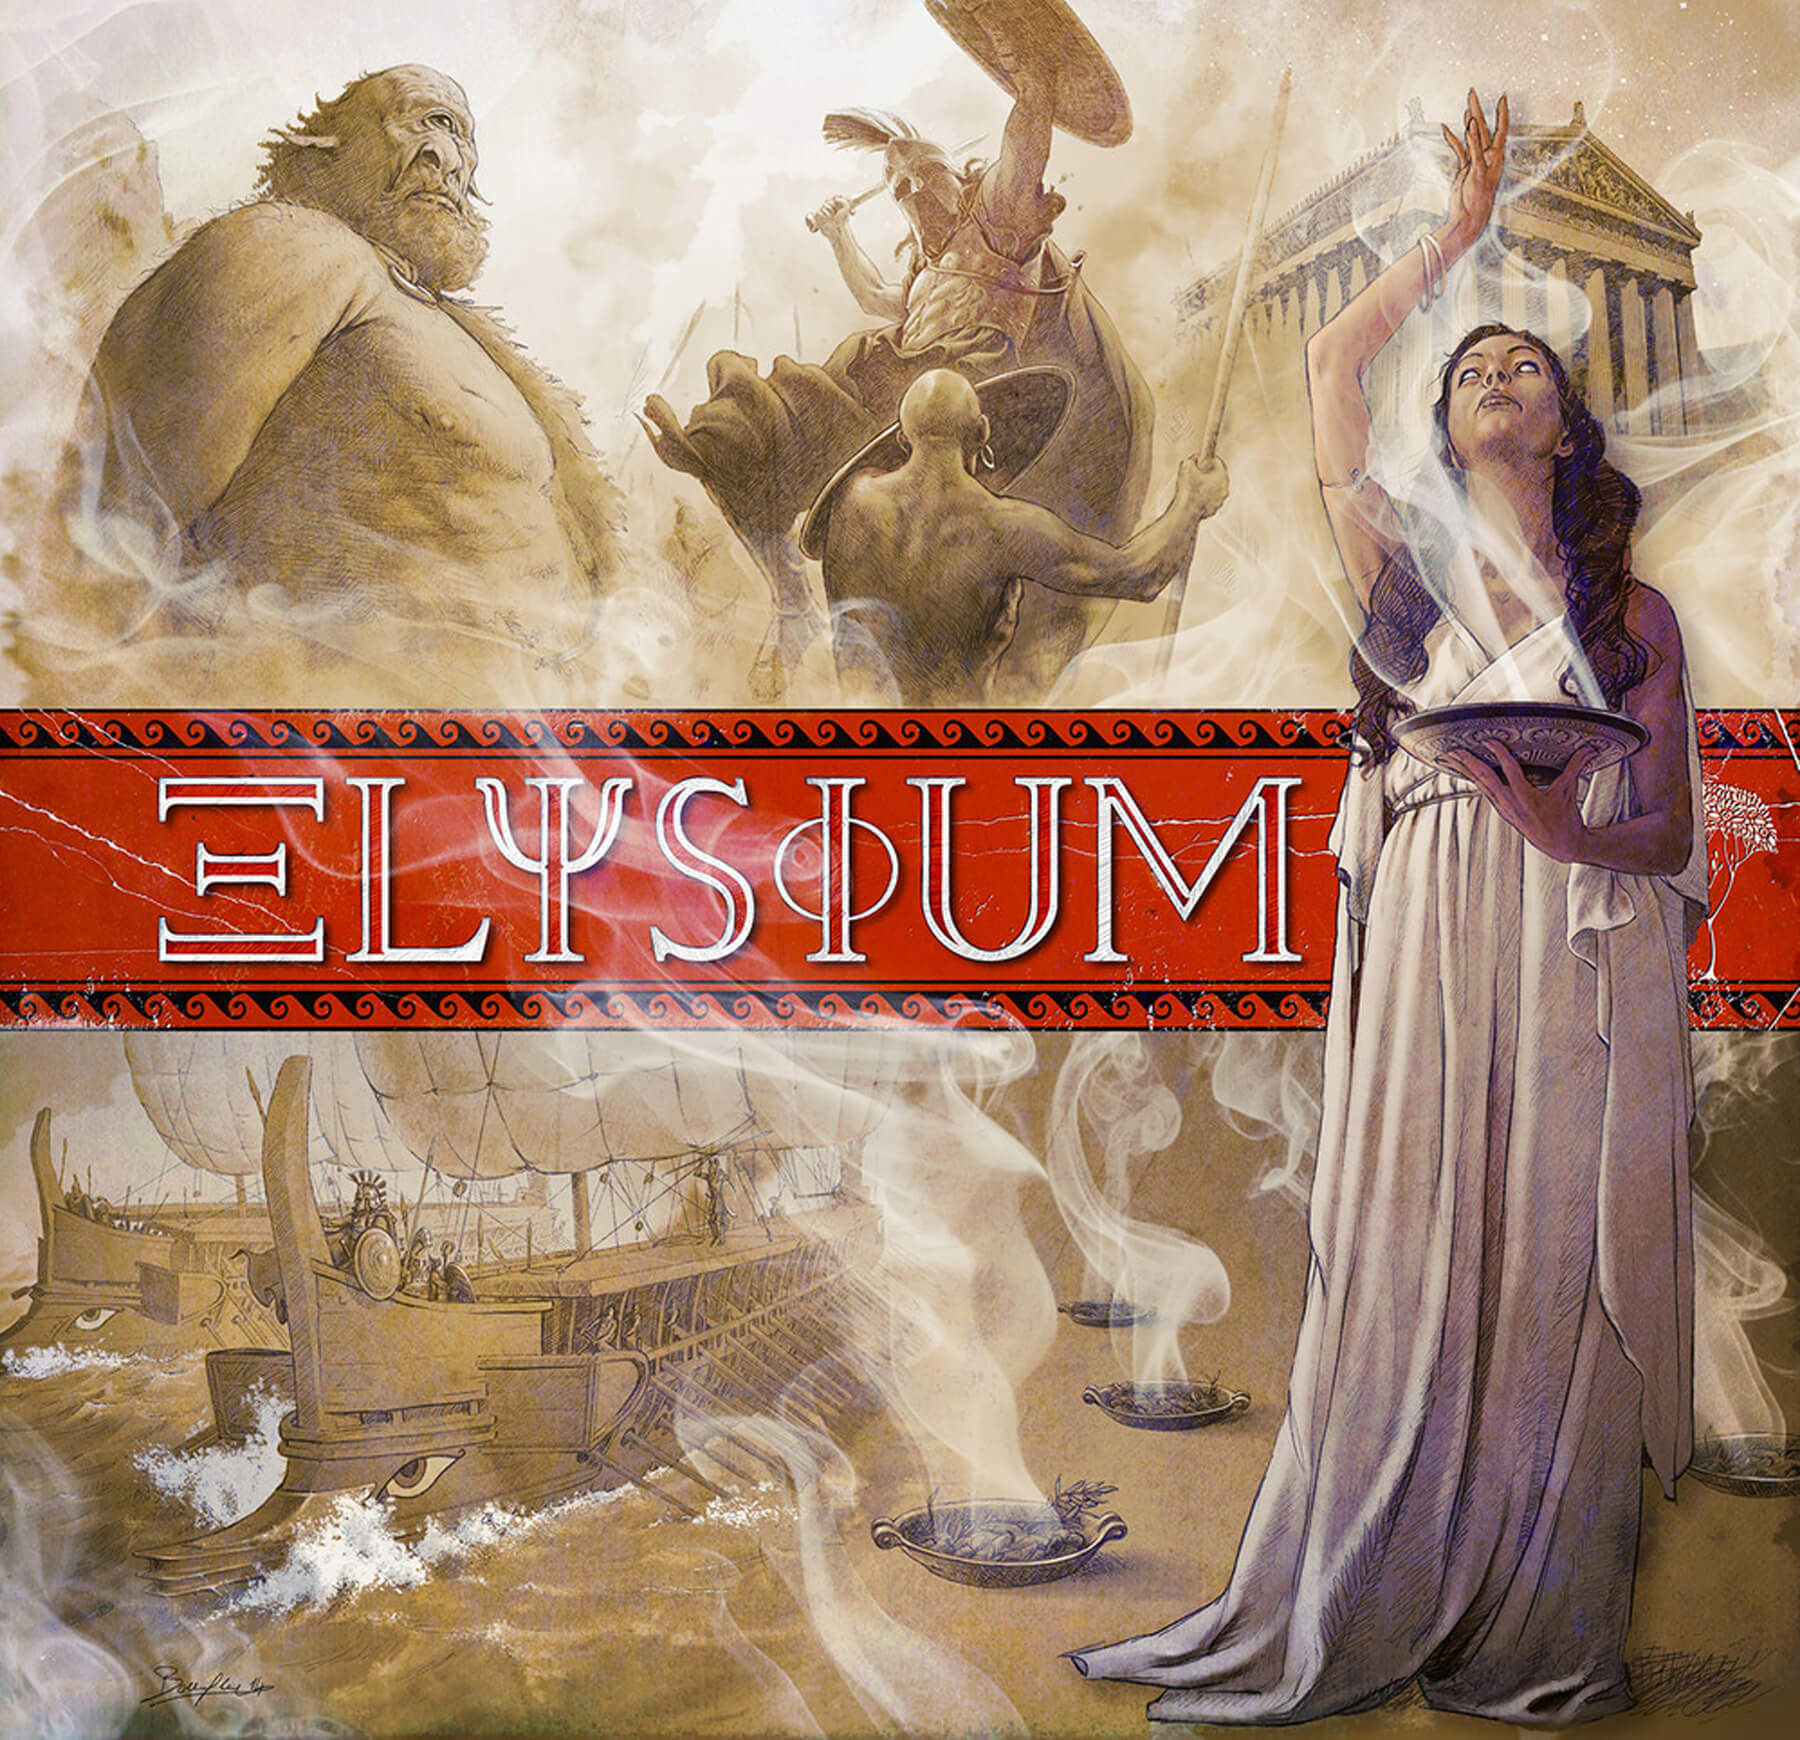 The cover art for the board game Elysium.